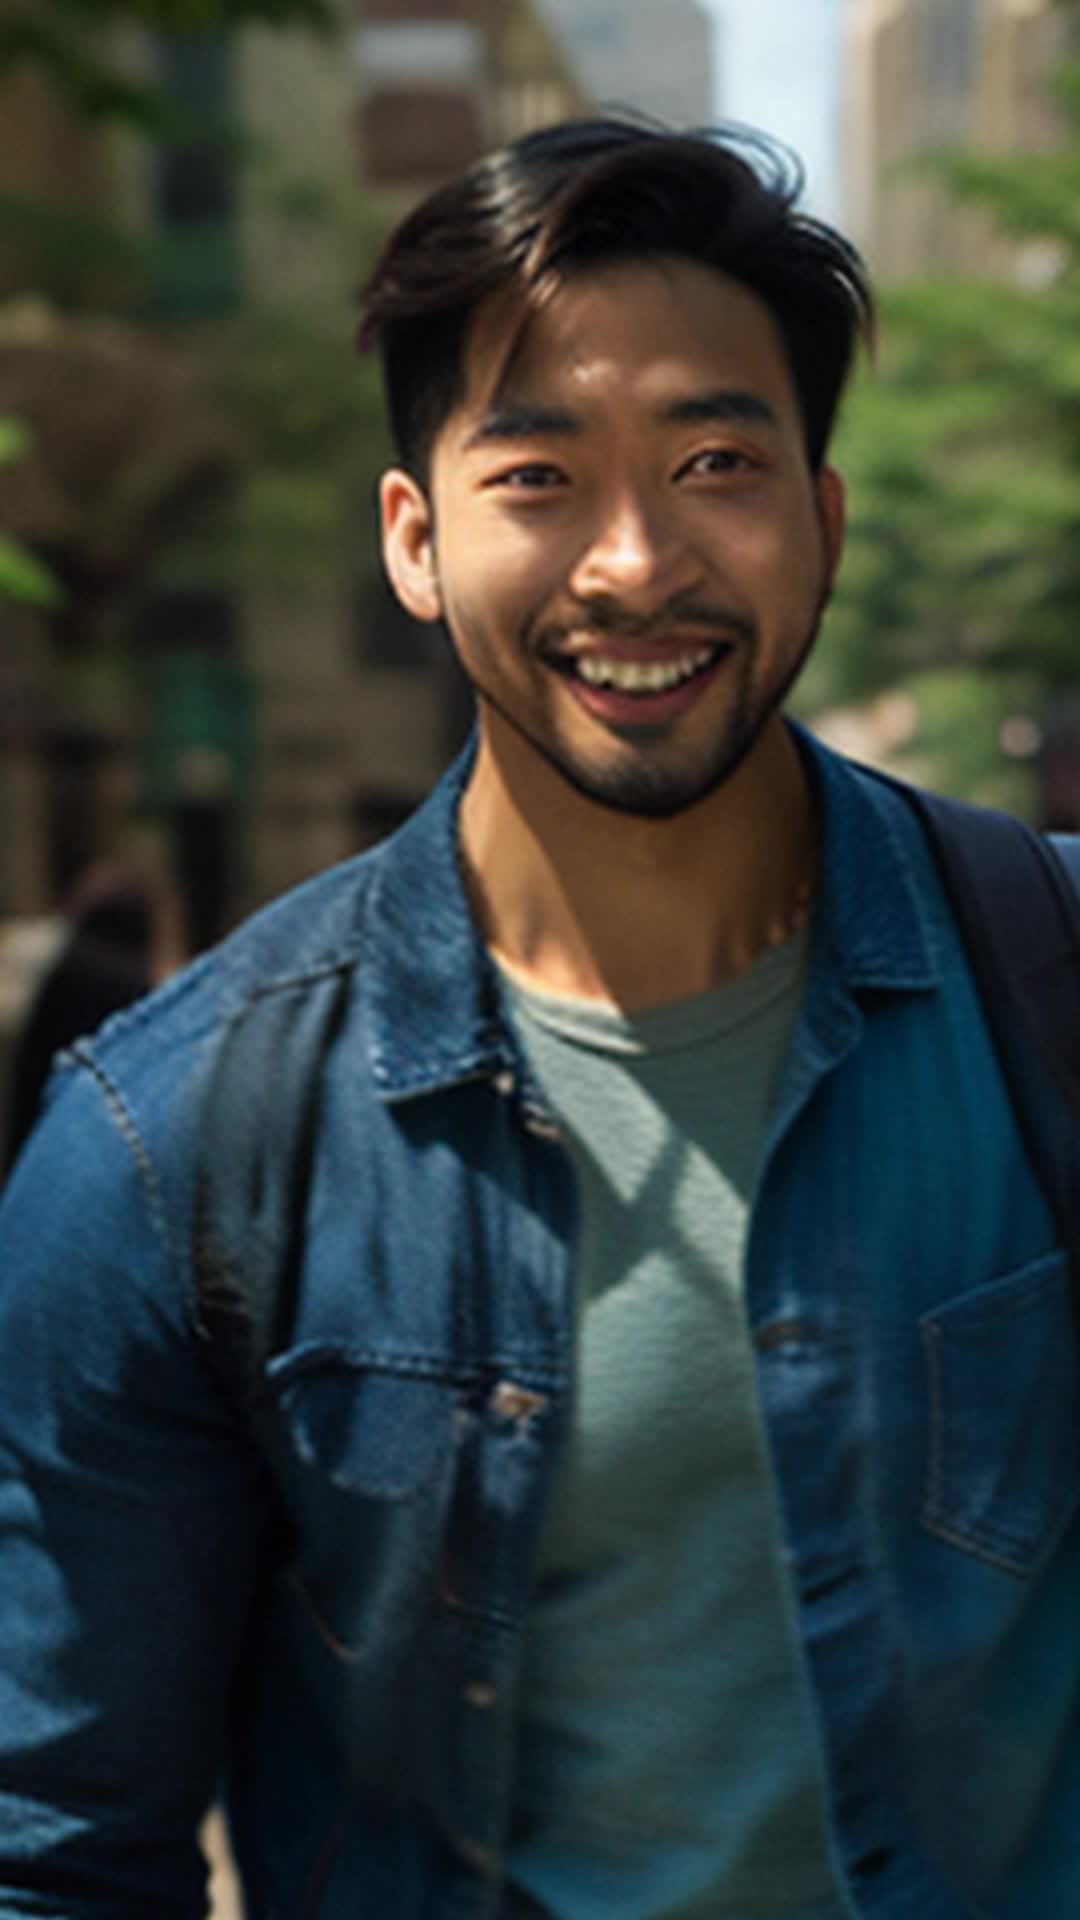 Young Asian man stepping out, bustling Chicago street, confident stride, broad smile, fresh beard, afternoon sun reflection, bystanders glancing, urban setting